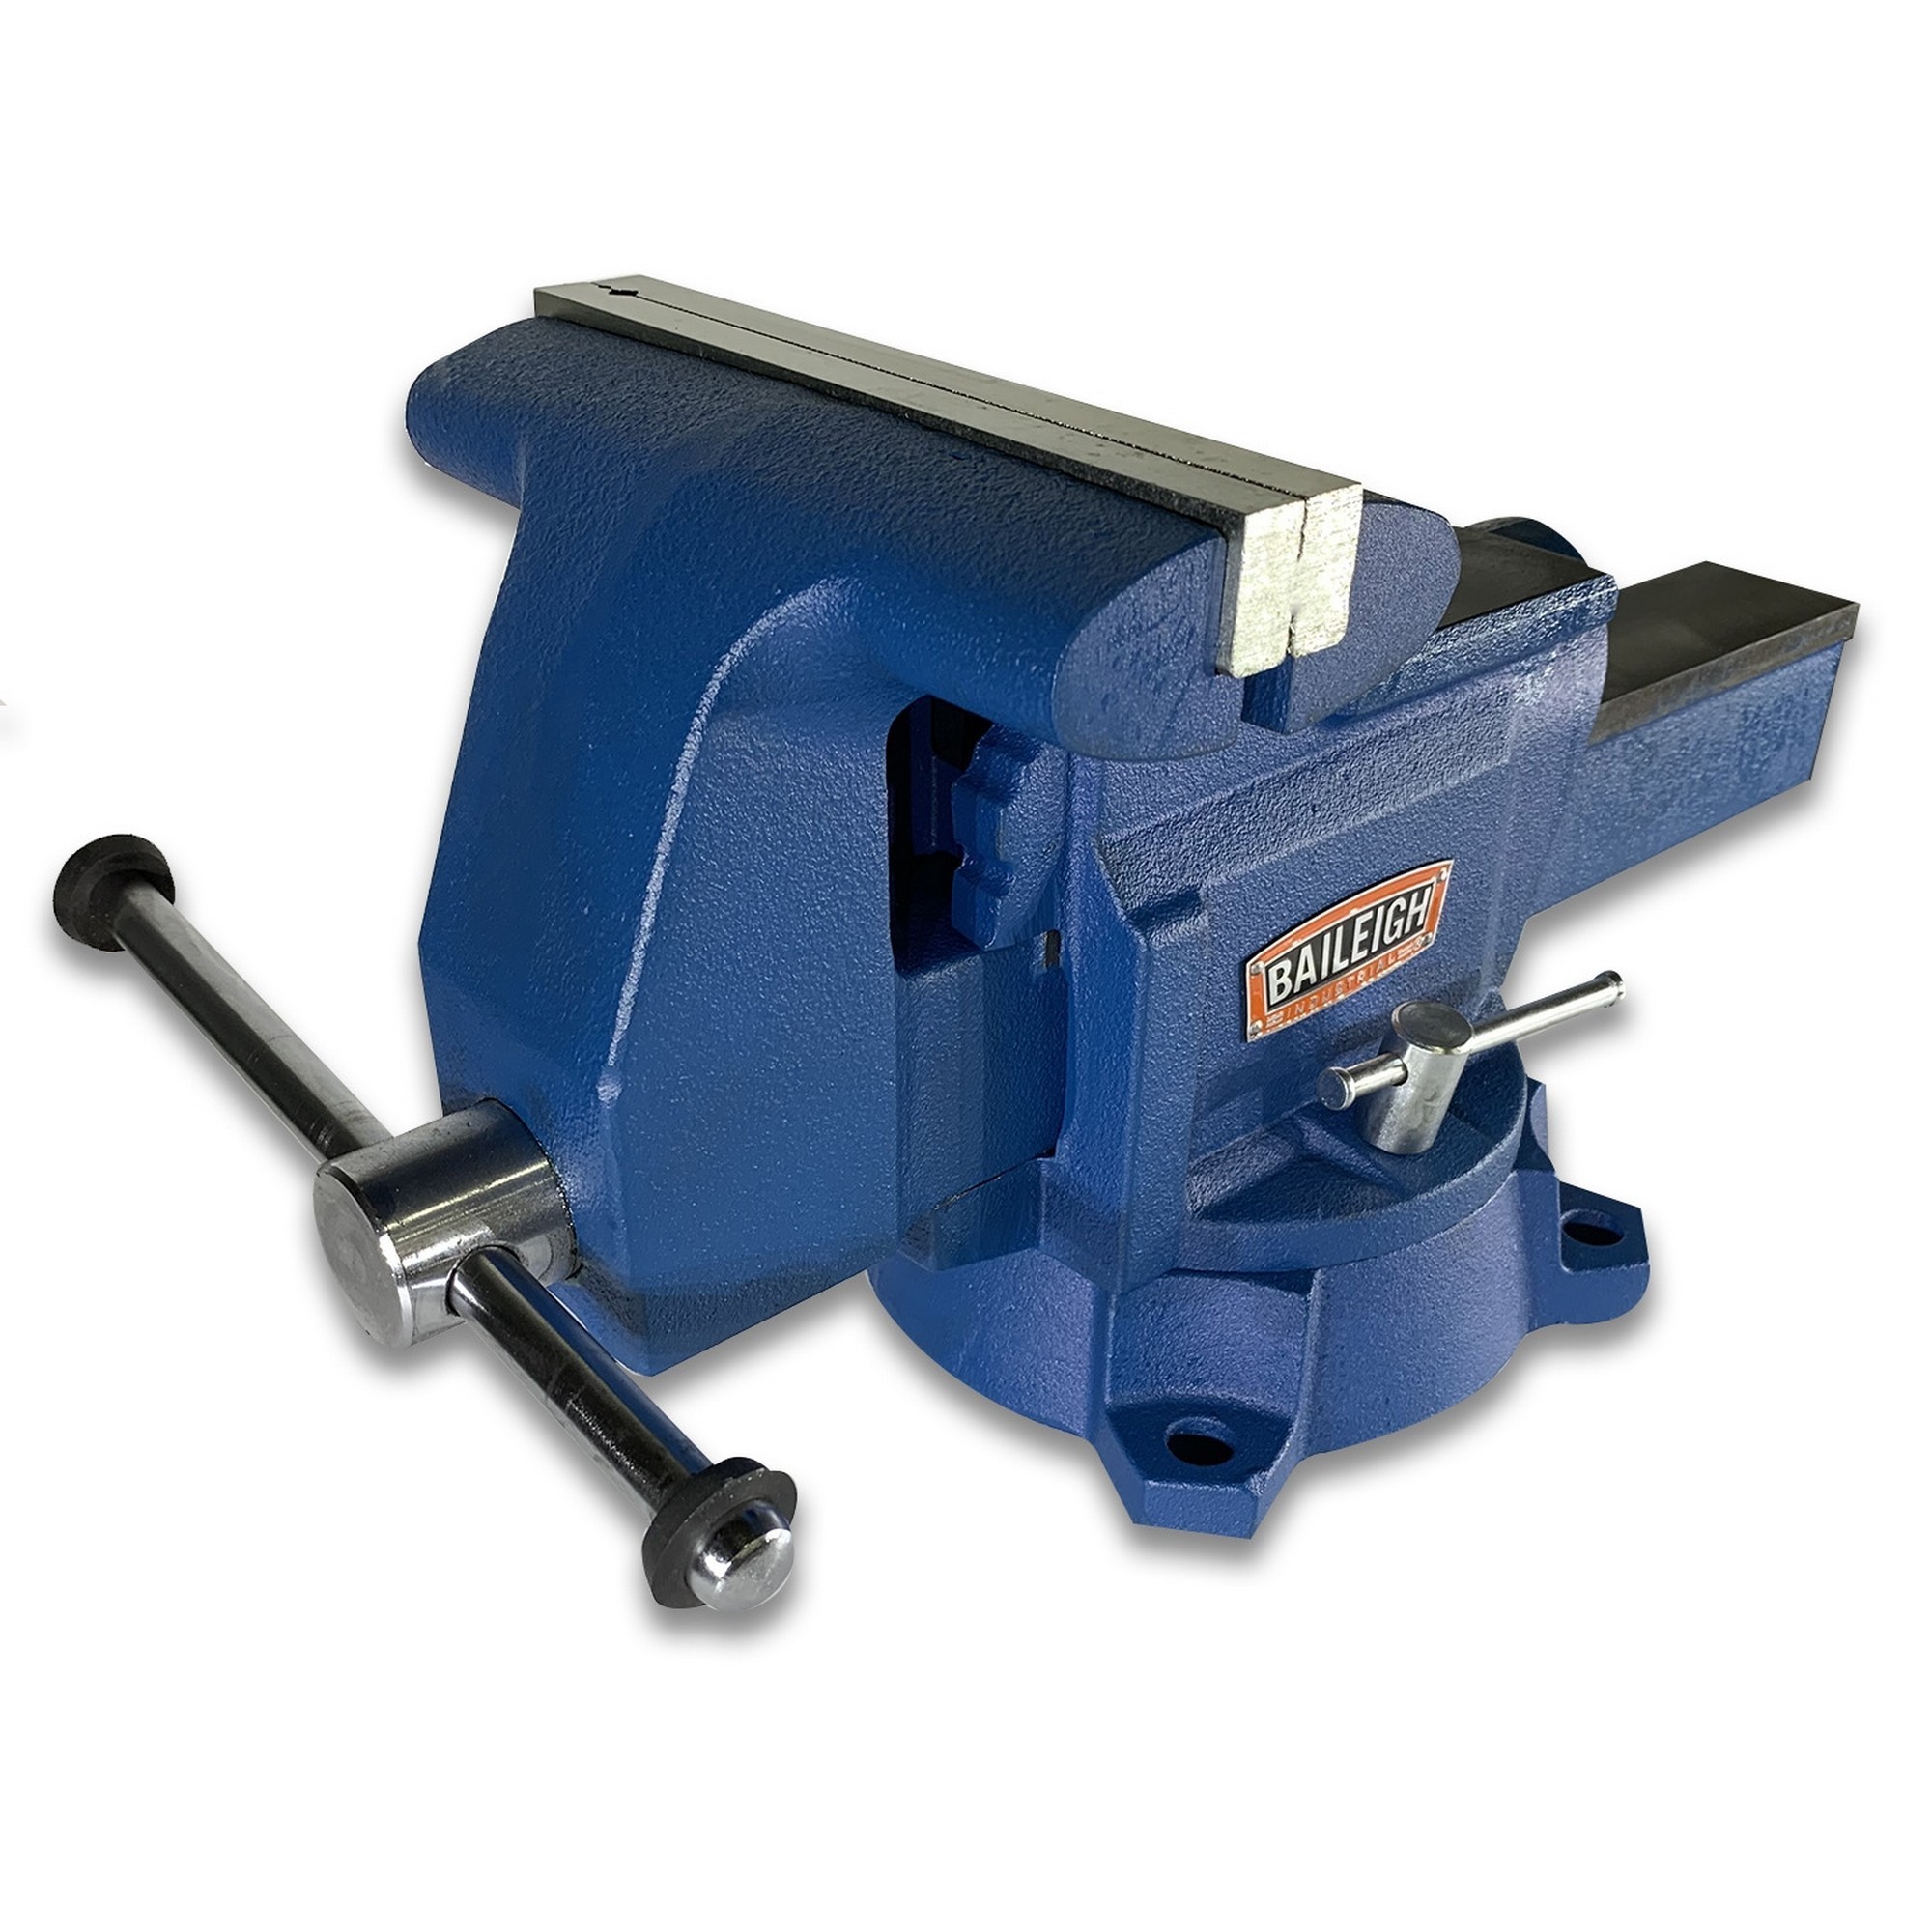 Baileigh, Vise, Jaw Width 8 in, Jaw Capacity 6 in, Model BV-8I